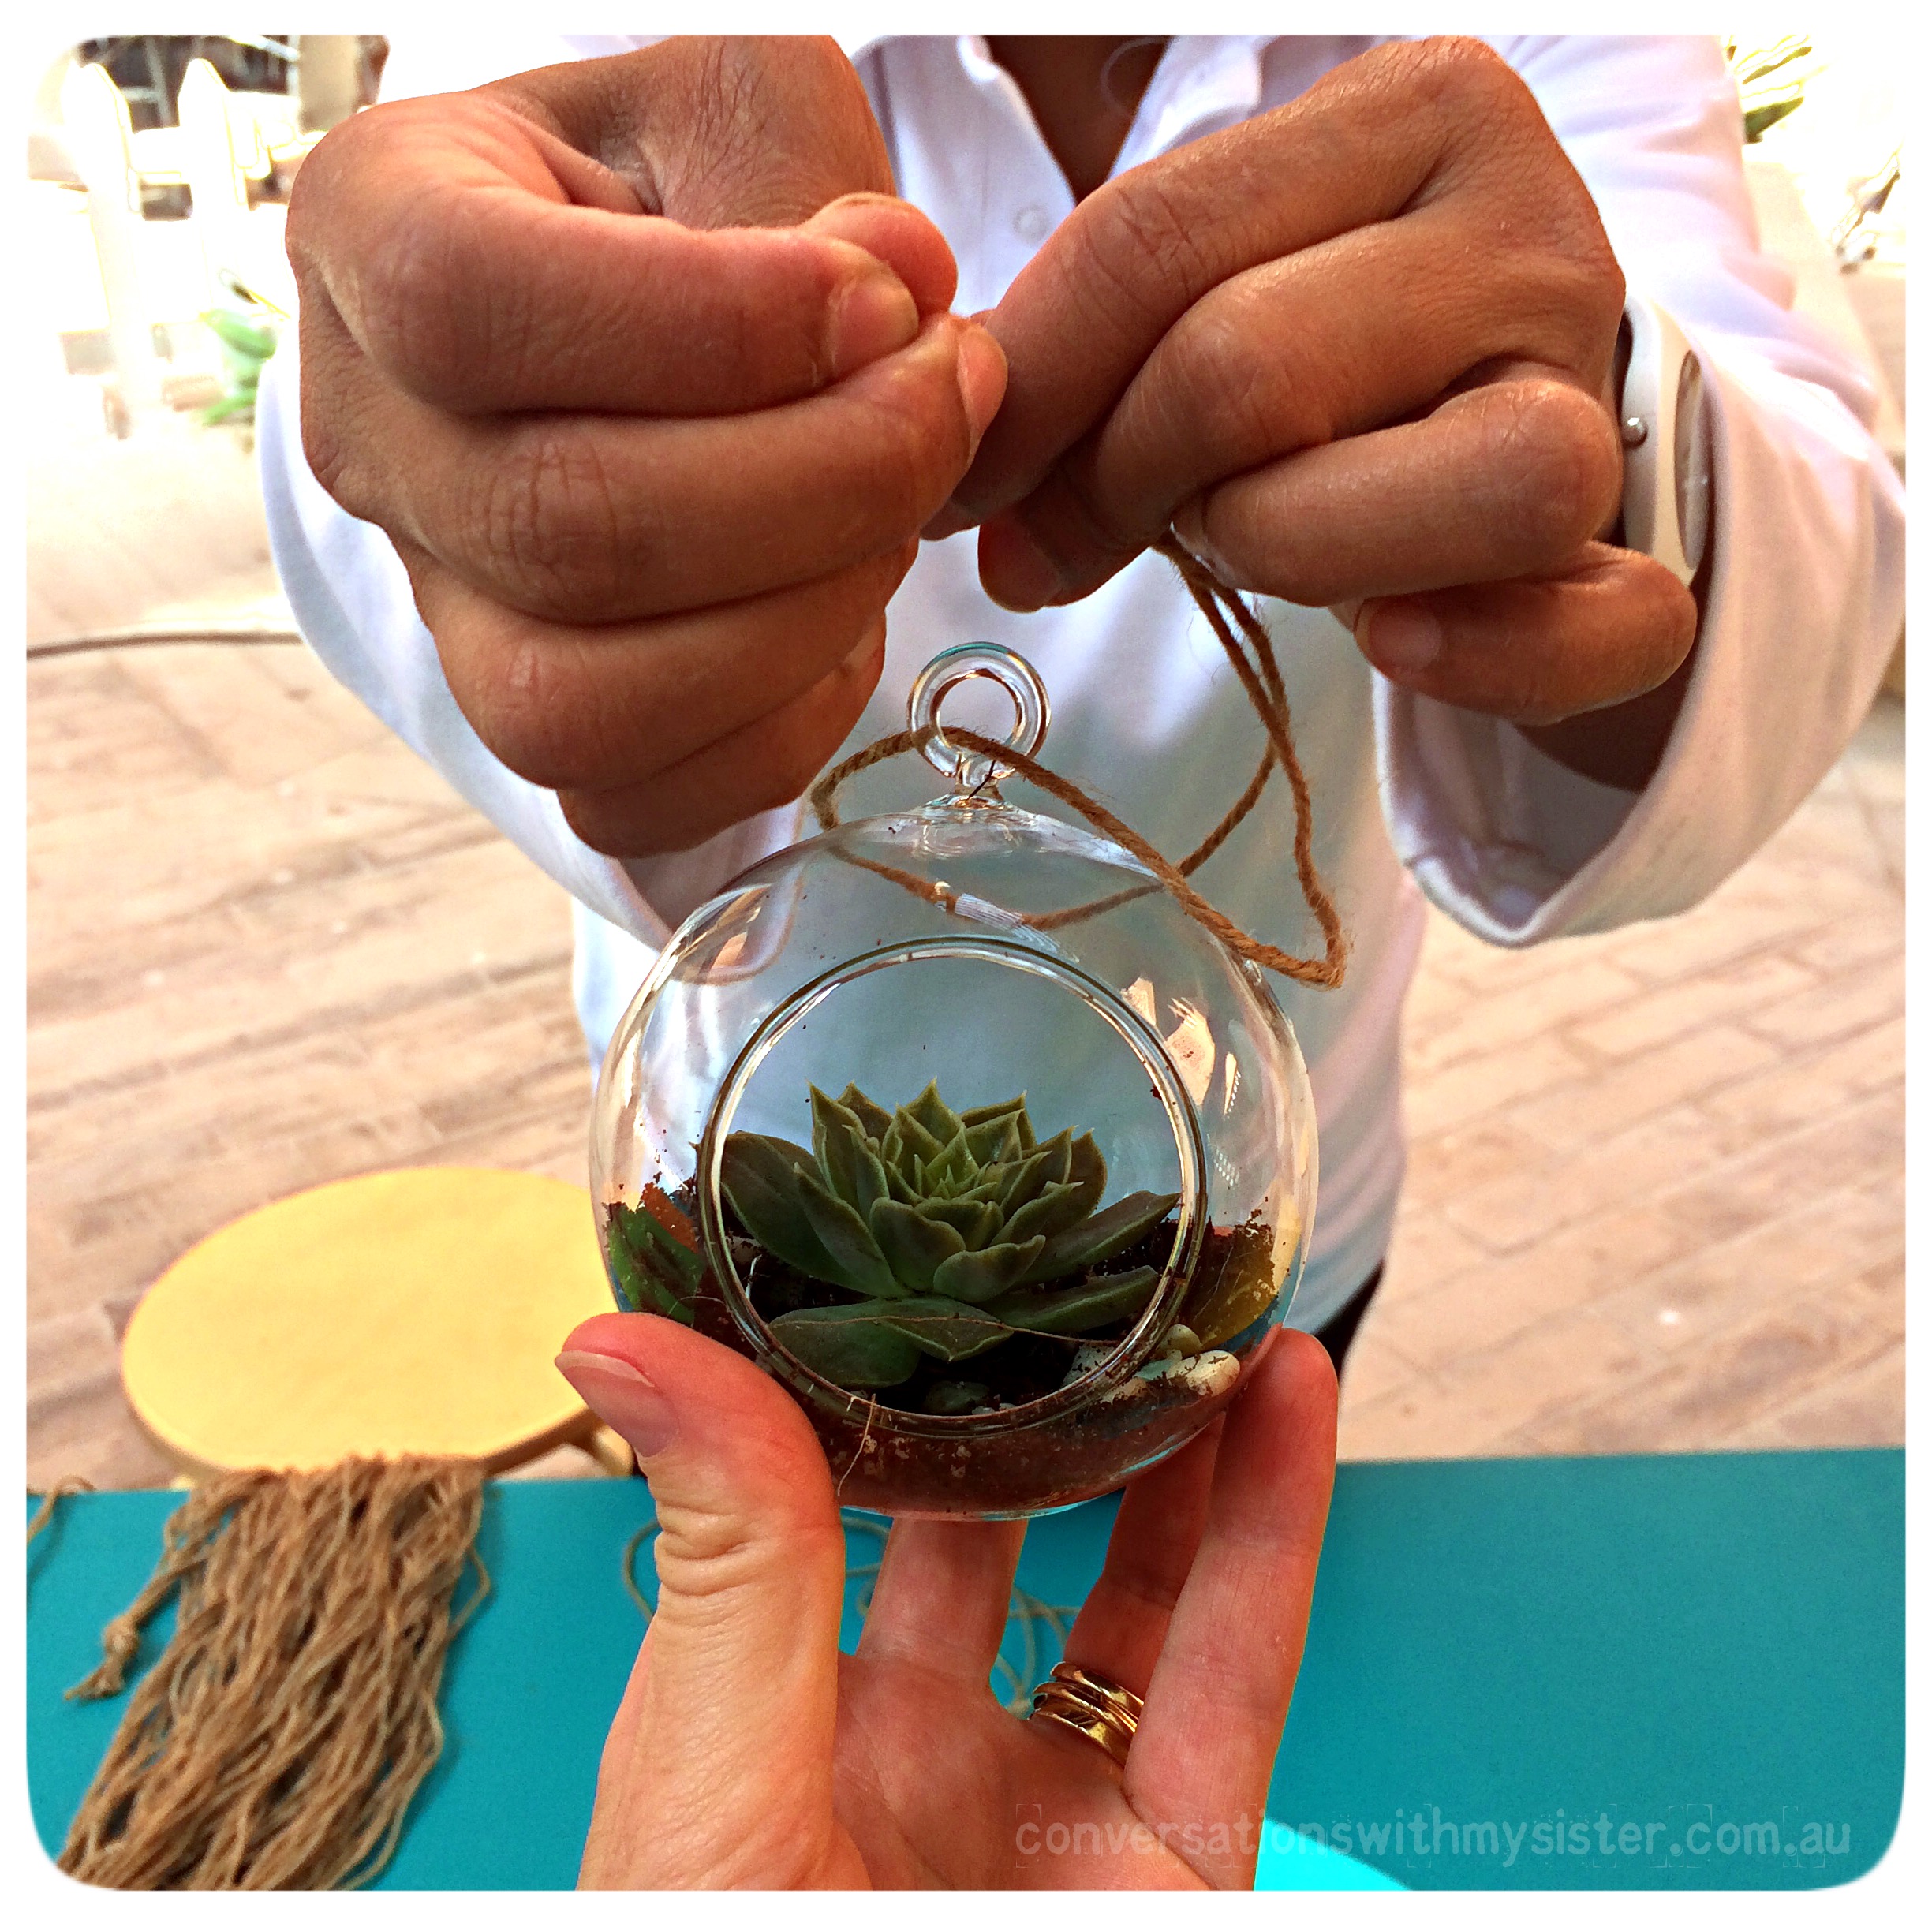 A succulent terrarium is an ‘on trend’ ecosystem and the perfect way to add a touch of green to a little corner of your home. Choosing to feature succulents and cacti is perfect for us ‘desert dwellers’, as these plants require little water to grow. Here are the 6 simple #DIY steps you need to follow to make your very own.